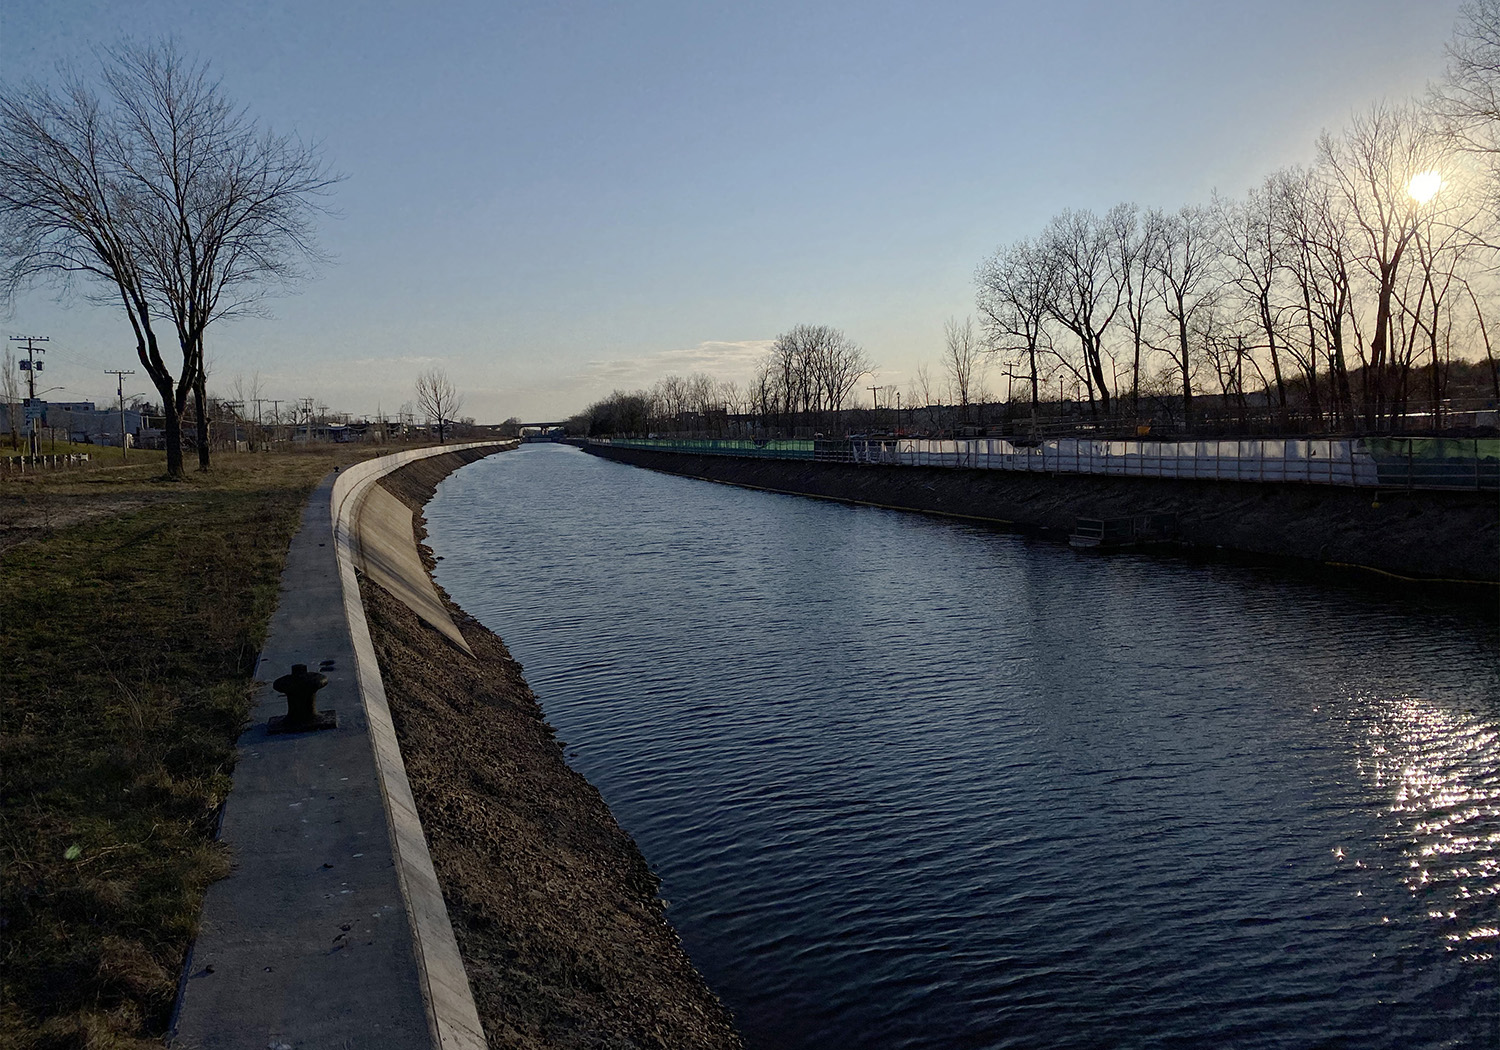 A vacant southwestern stretch of the canal.